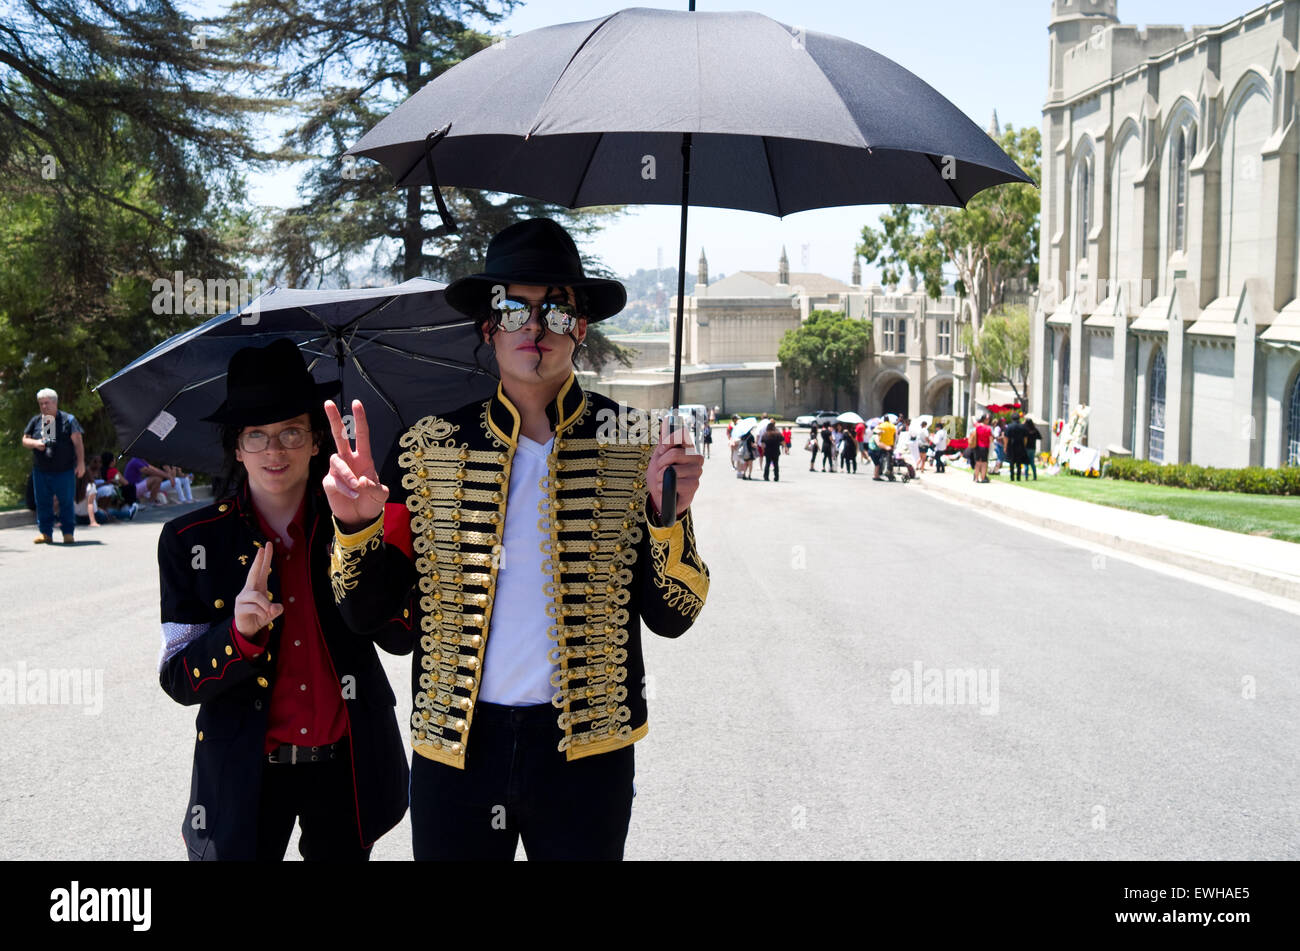 Glendale, California, USA. 25th June, 2015. A Michael Jackson impersonator poses with fans near Michael Jackson's grave in the Forest Lawn Memorial Park in Glendale, California, USA, 25 June 2015. Photo: Marcus Teply/dpa/Alamy Live News Stock Photo